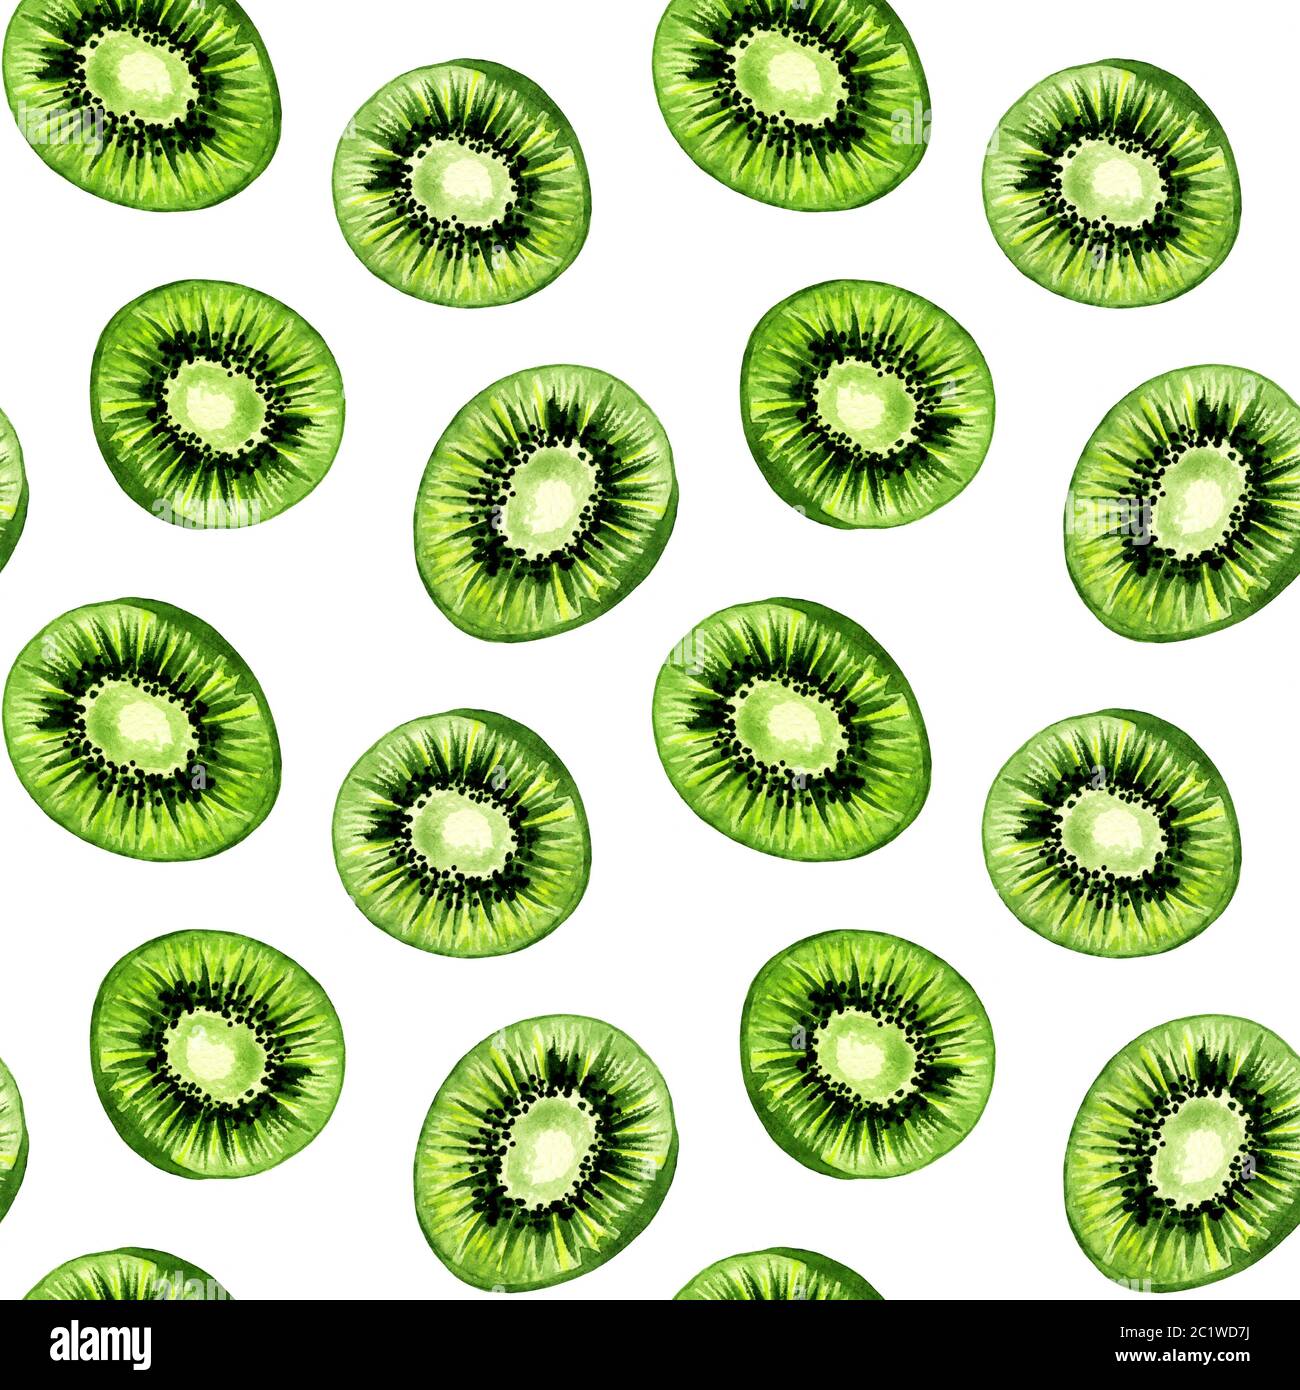 Kiwi pattern, seamless background, tropical fruits in watercolor paint drawing texture. Kiwi fruits slices pattern, green summer food design for textile or fabric print and decoration background Stock Photo